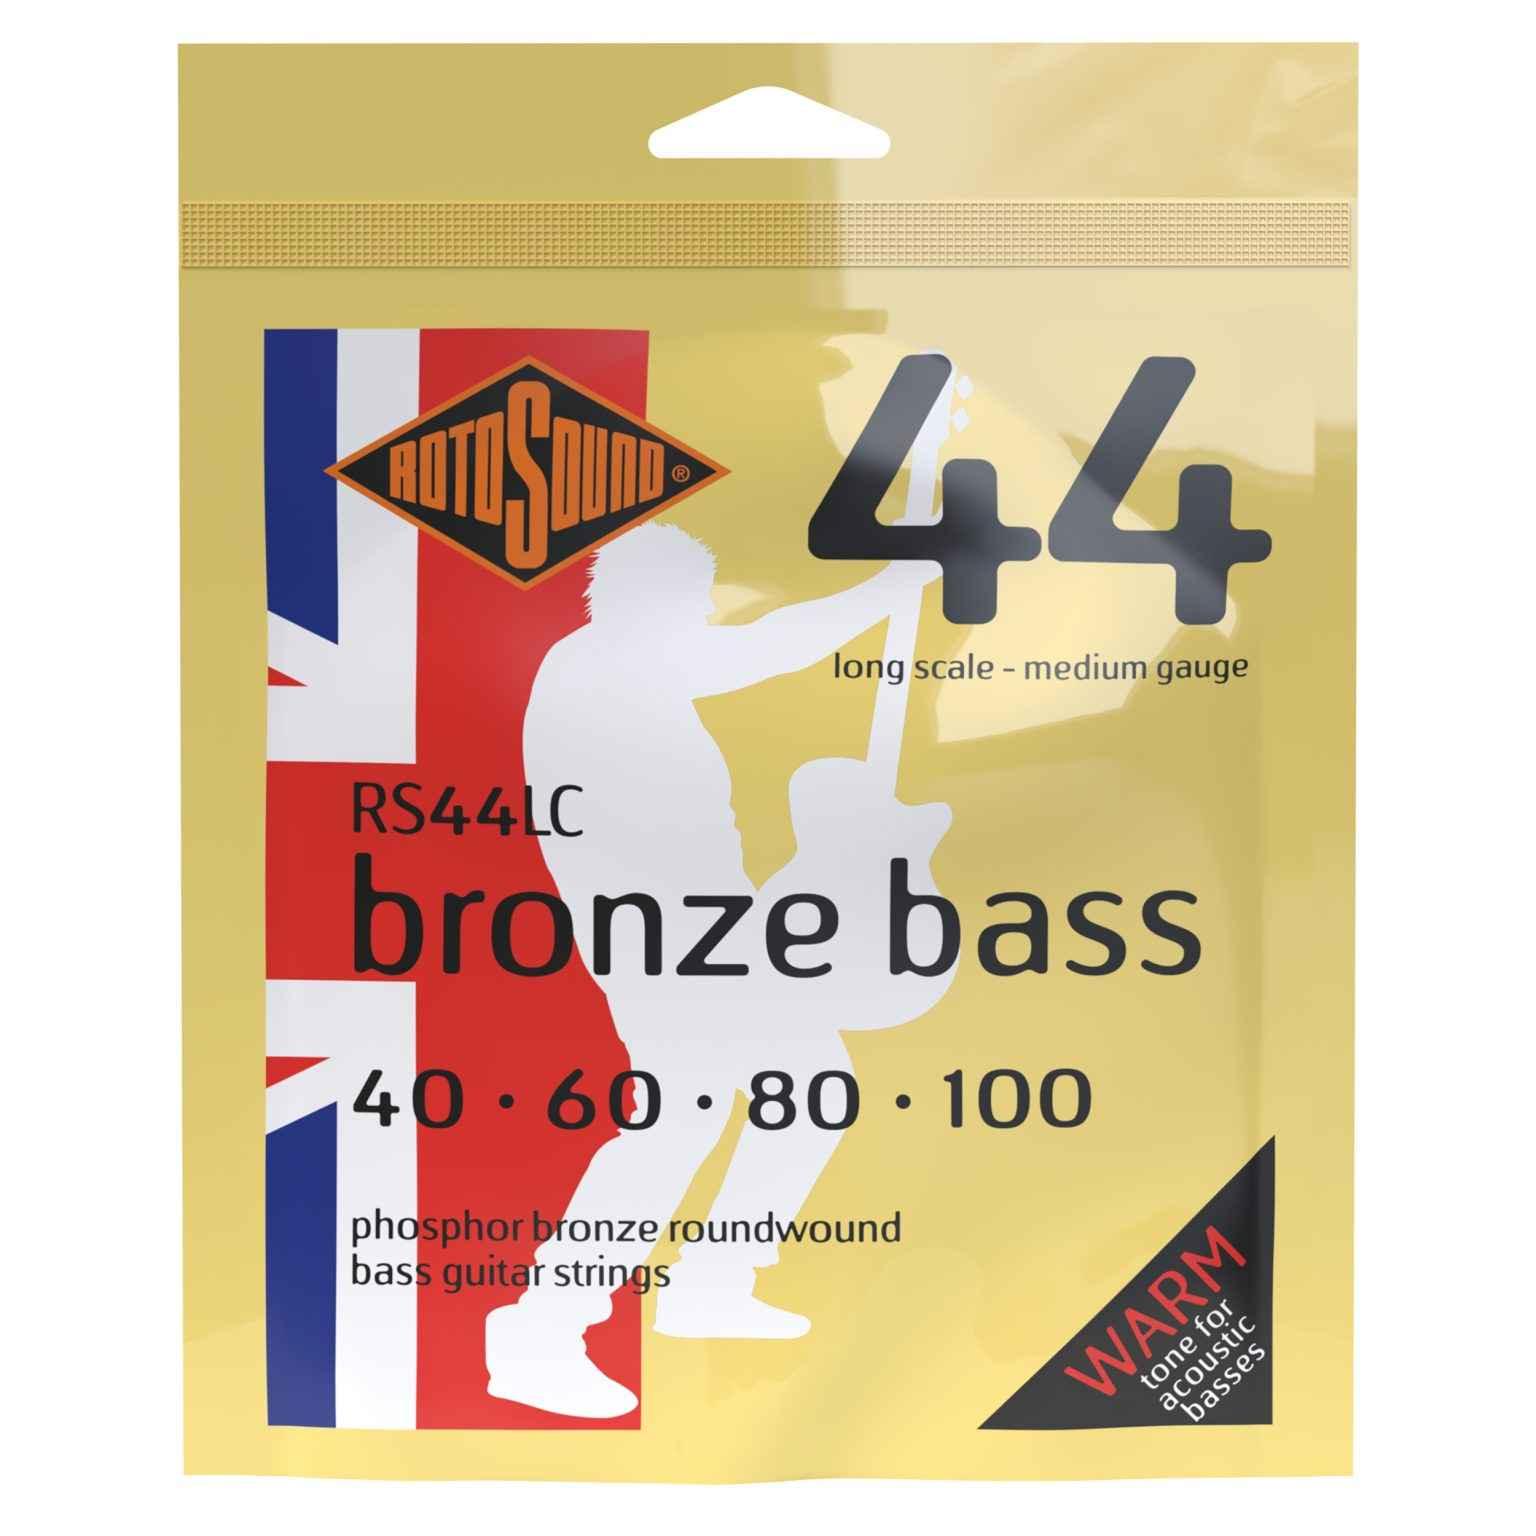 Rotosound Acoustic 44 40-100 Bass strings - Strings - Bass by Rotosound at Muso's Stuff